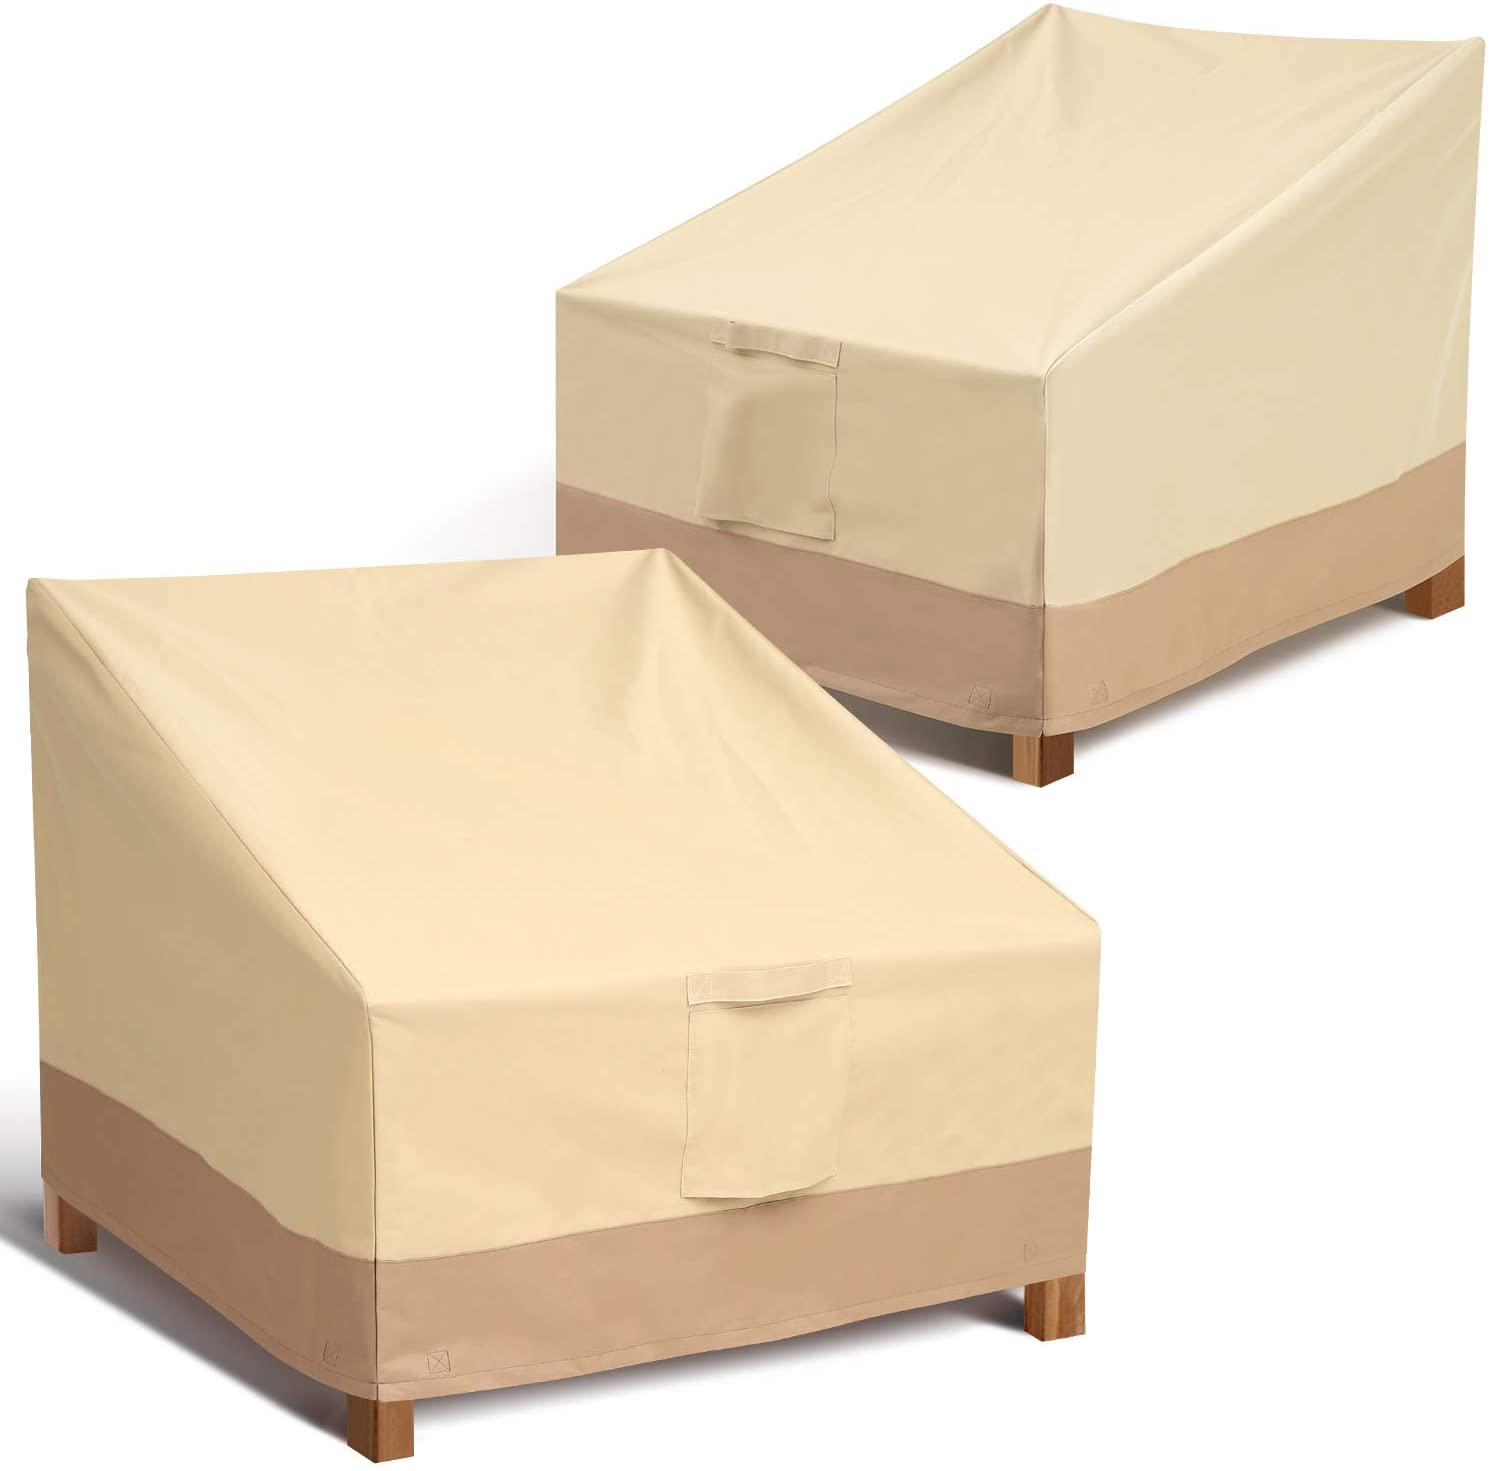 Leafbay Outdoor Deep Chair Patio Furniture Covers, 2-Pack